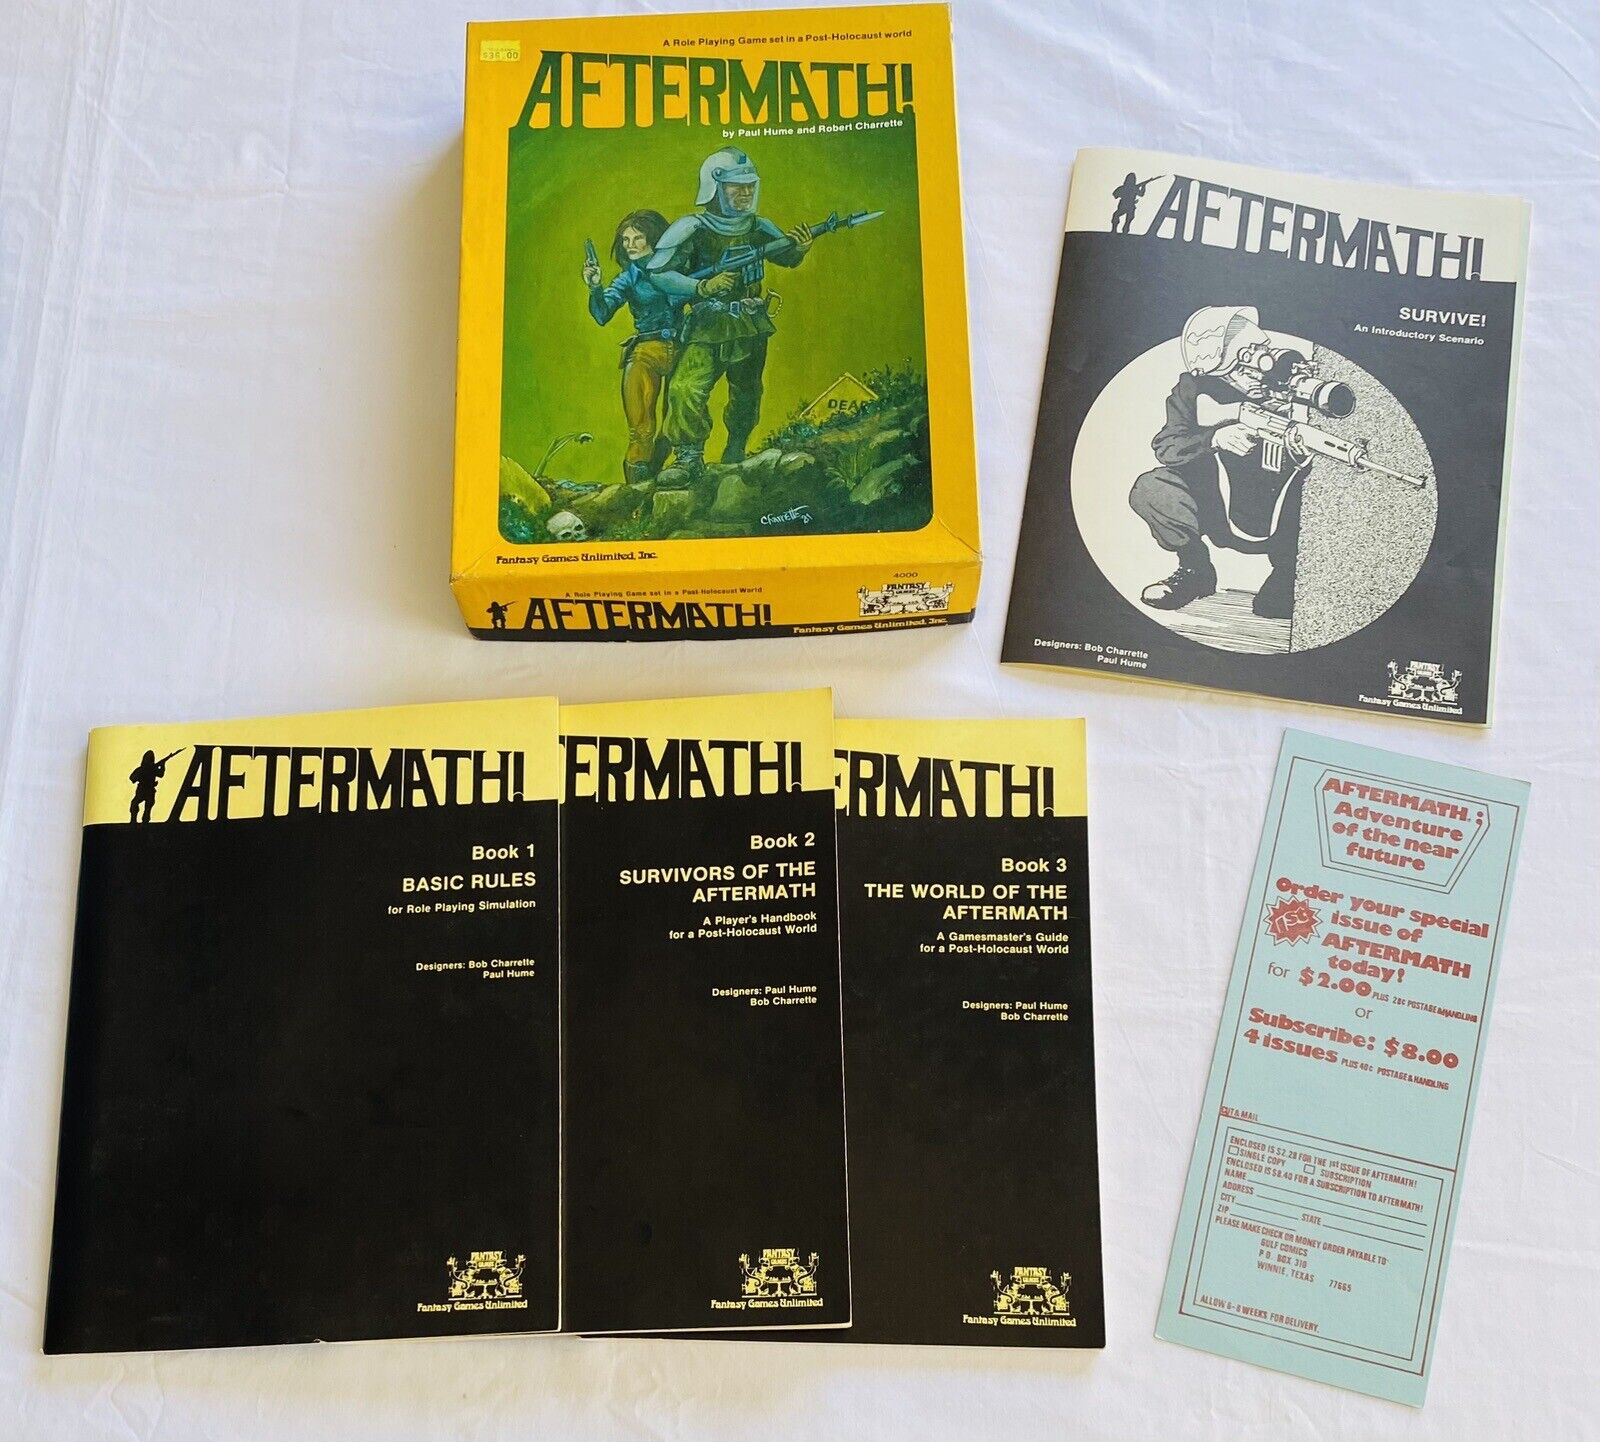 AFTERMATH Vintage Role Playing Game RPG Fantasy Games Inc 1981 Complete VGC